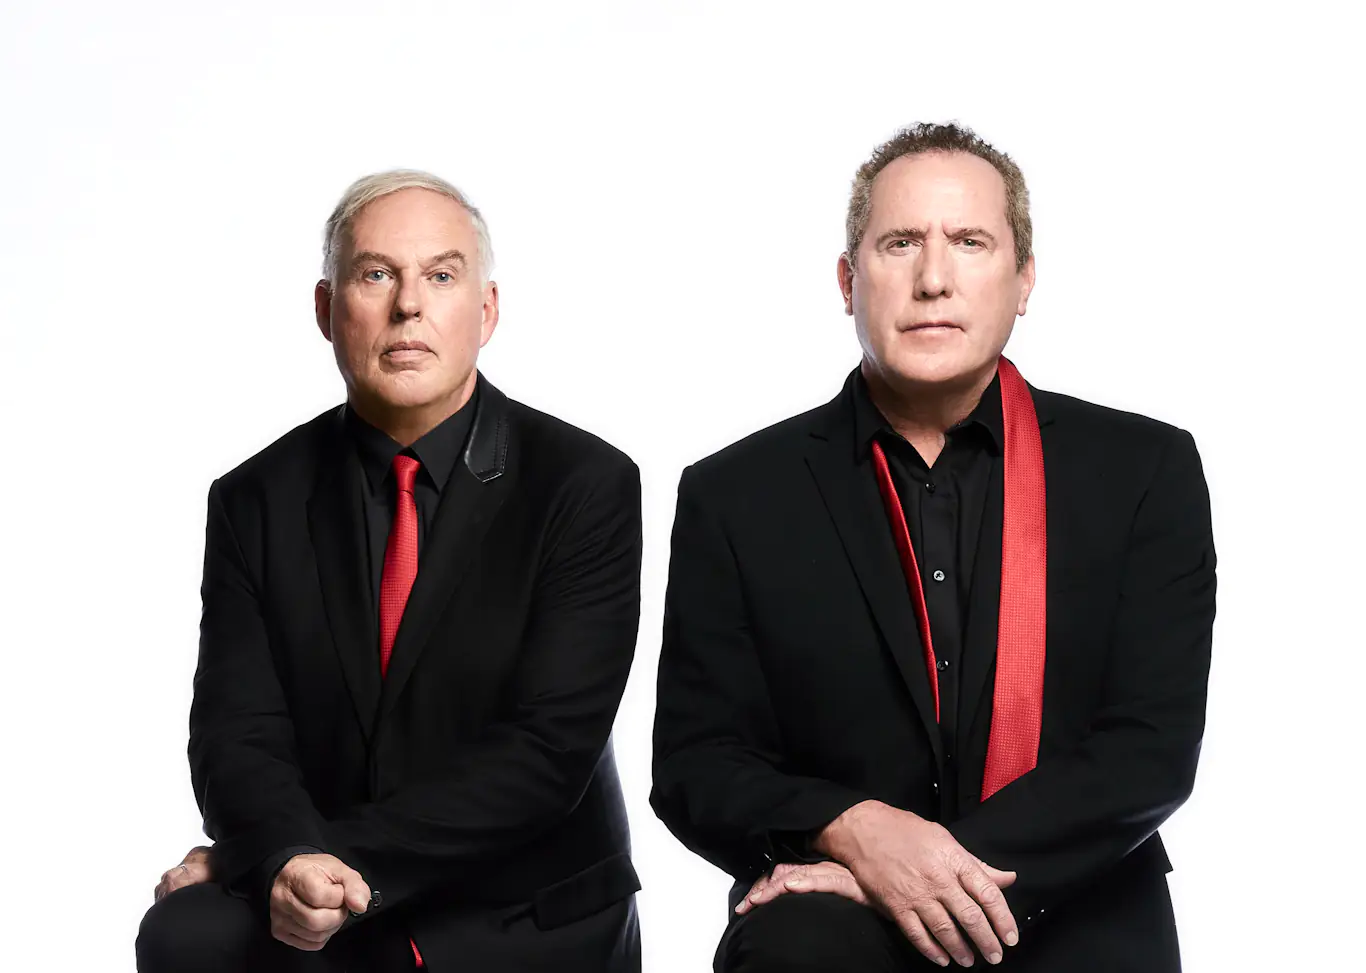 OMD release video for new single ‘Veruschka’ ahead of forthcoming album ‘Bauhaus Staircase’